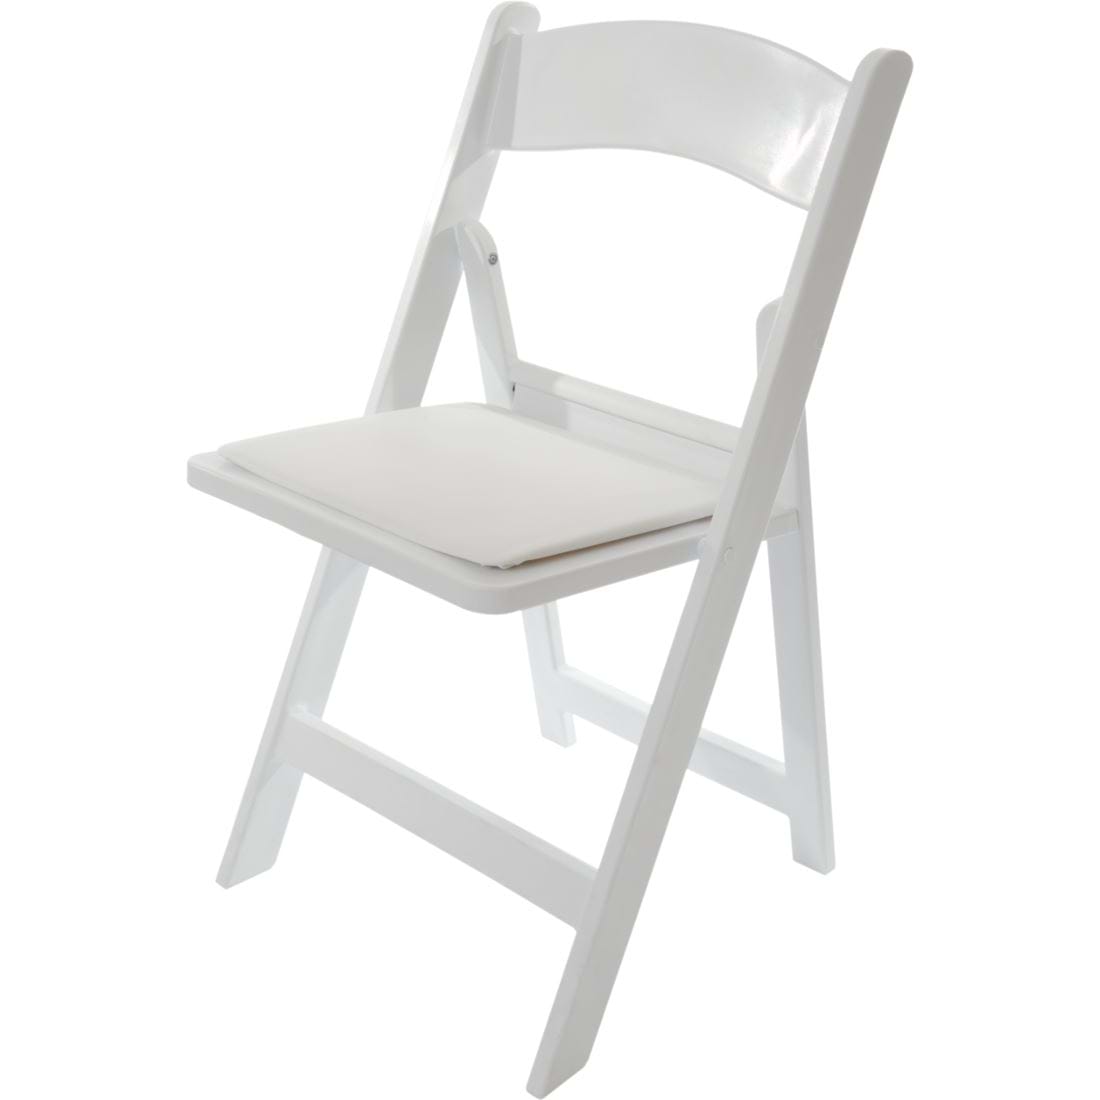 White Resin Folding Chairs | National Event Supply